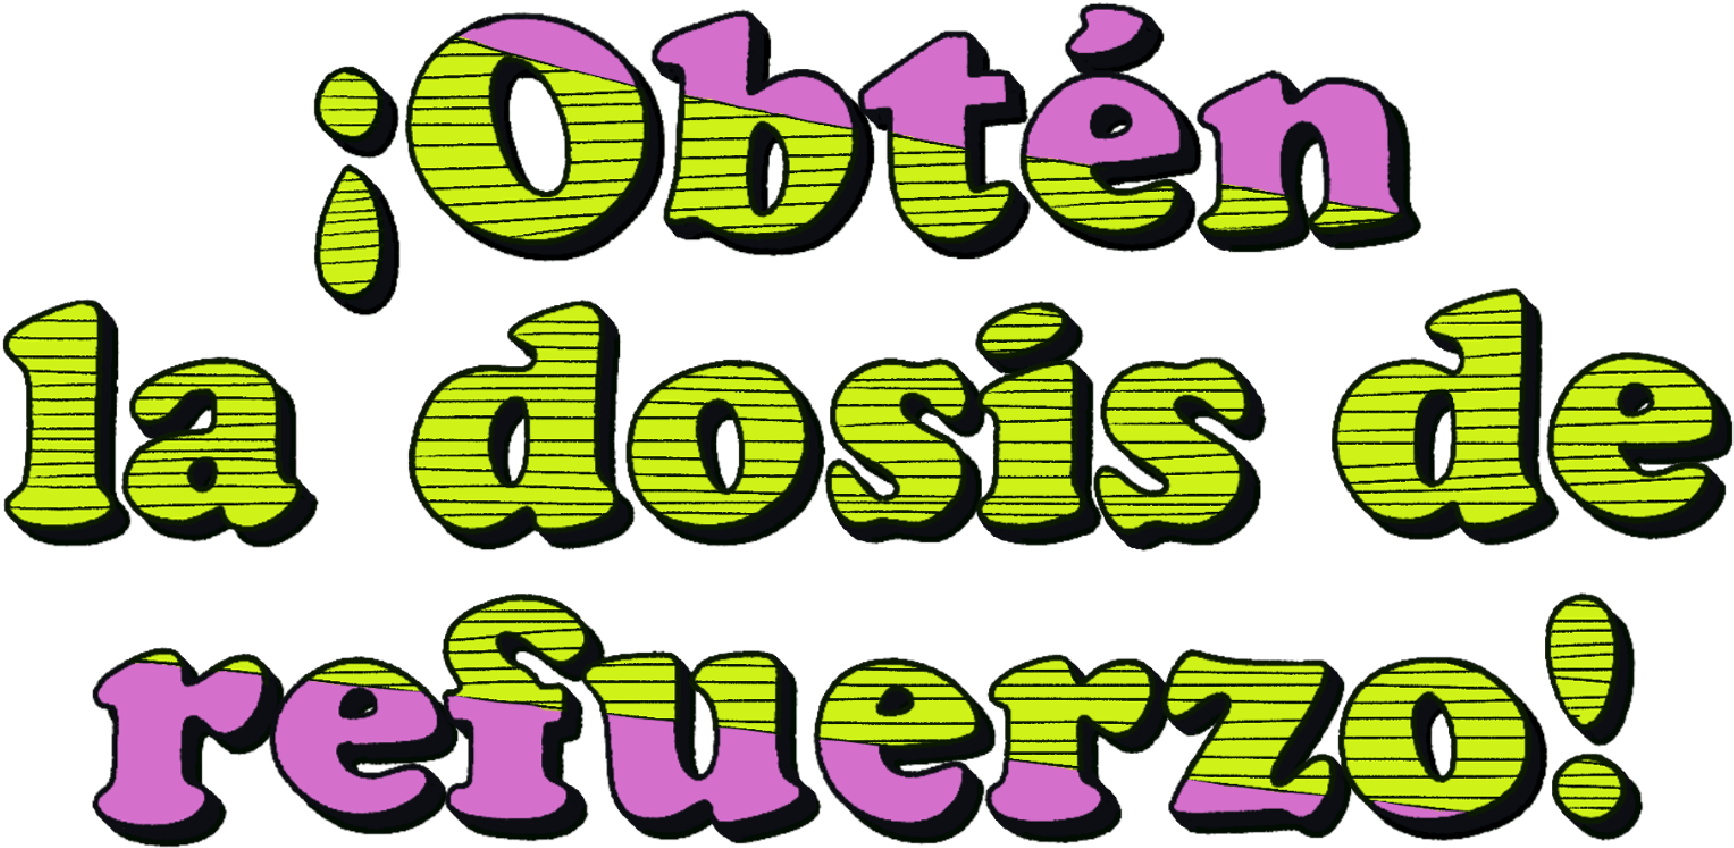 Illustrated, stylized lettering of the saying "¡Obtén la dosis de refuerzo!"